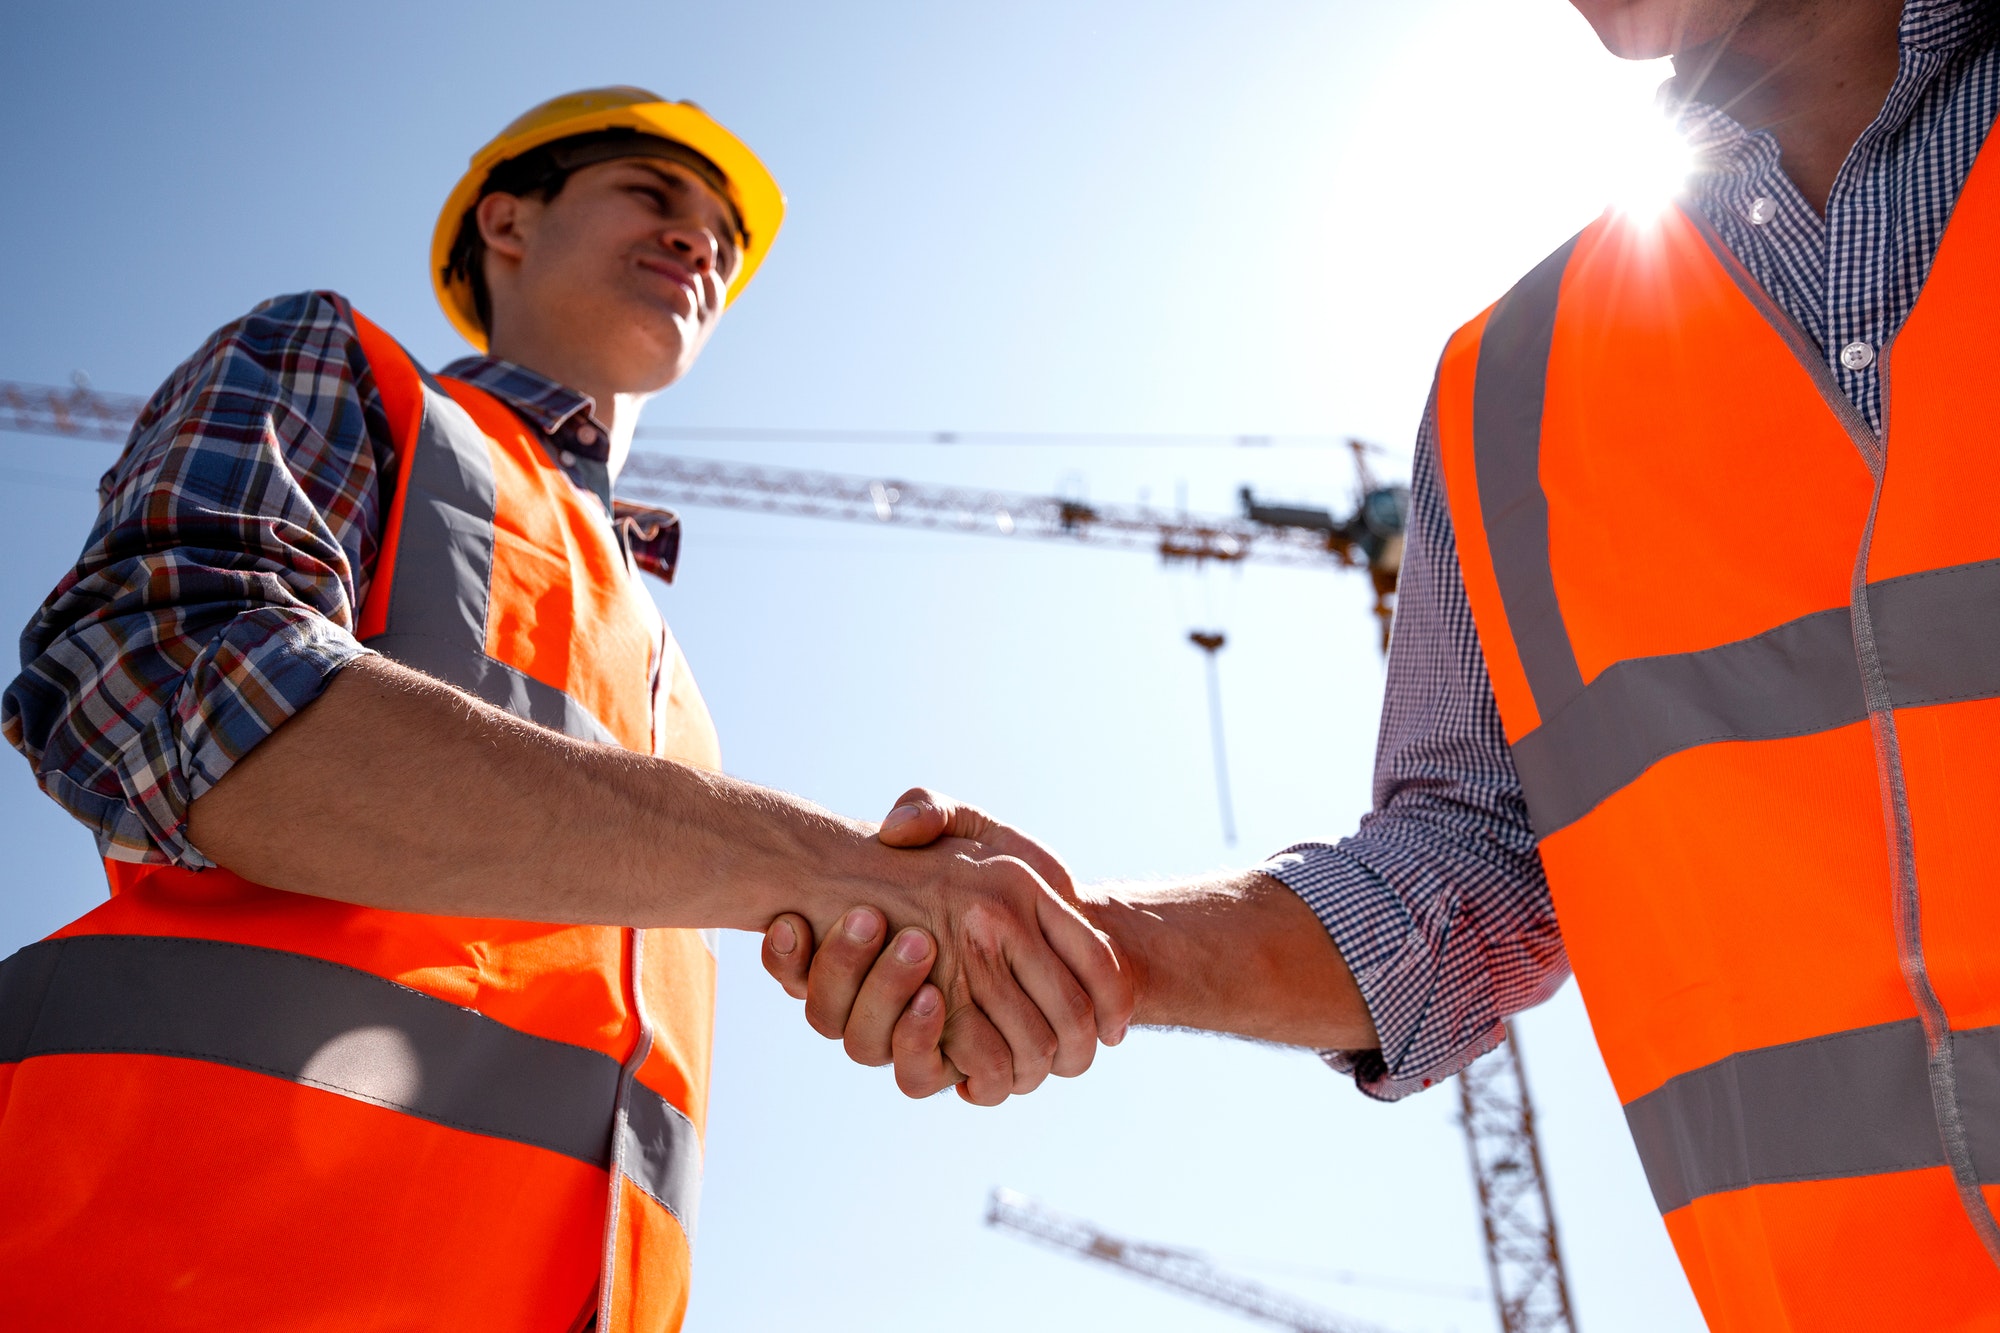 structural engineer and architect dressed in orange work vests and helmets shake hands on the